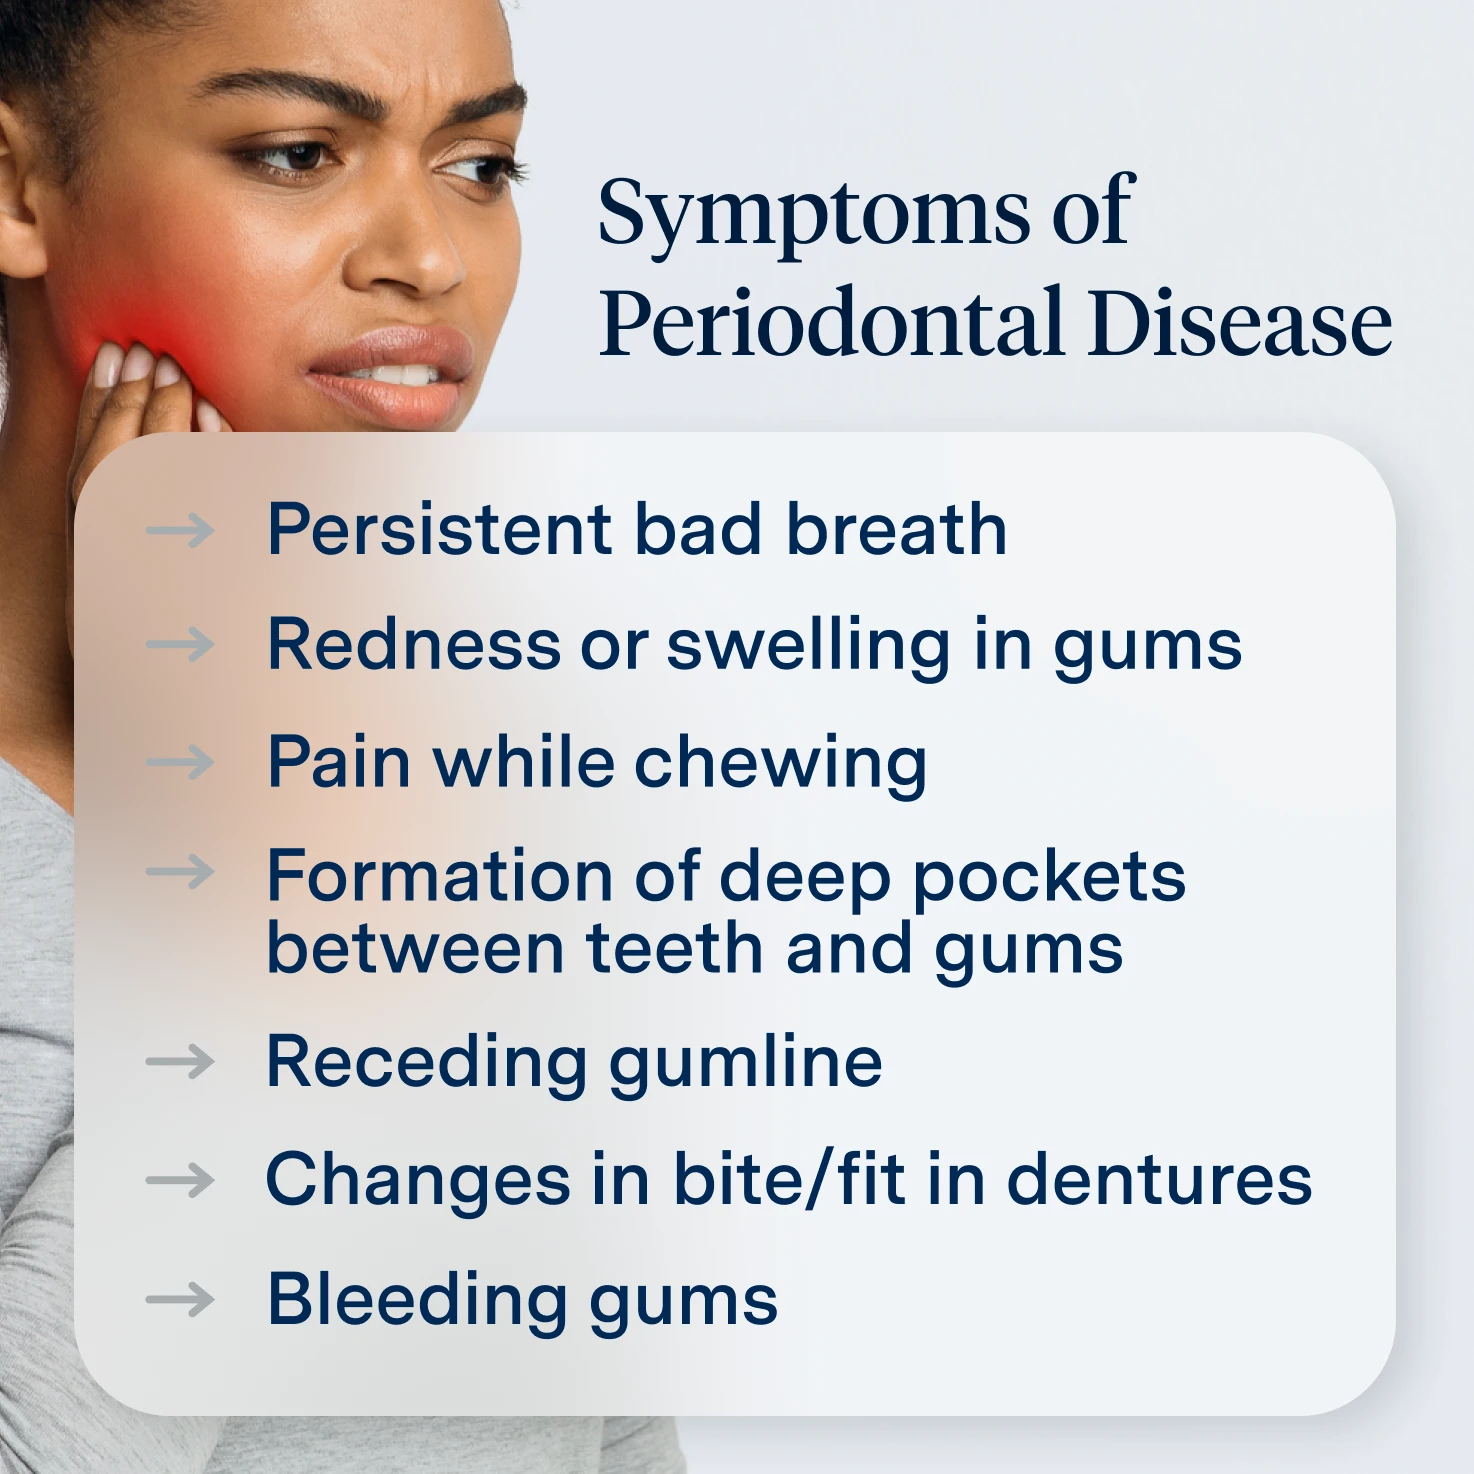 Symptoms of Periodontal Disease: Persistent bad breath, Redness or swelling in gums, Pain while chewing, Formation of deep pockets between teeth and gums, Receding gumline, Changes in bite/fit in dentures, Bleeding gums. 